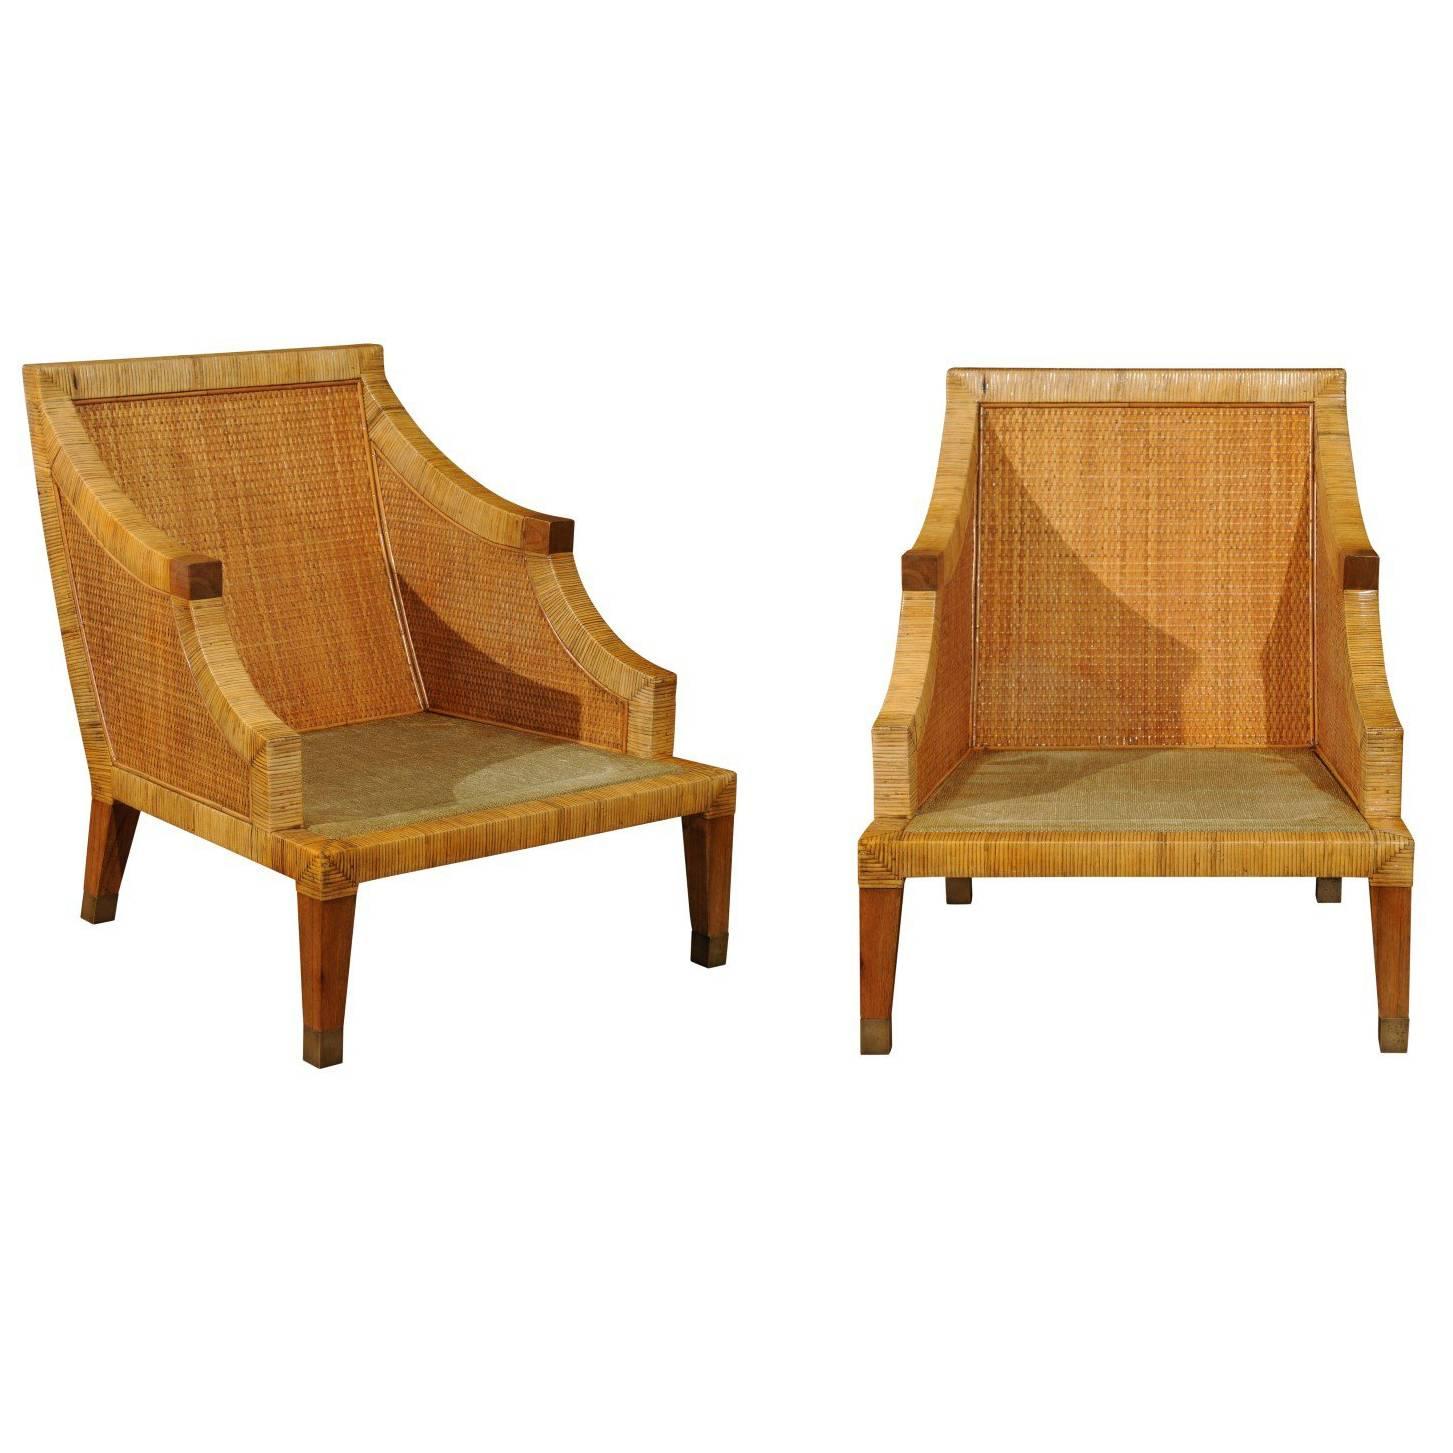 Stellar Restored Pair of Vintage Cane Wrapped Club Chairs by Bielecky Brothers